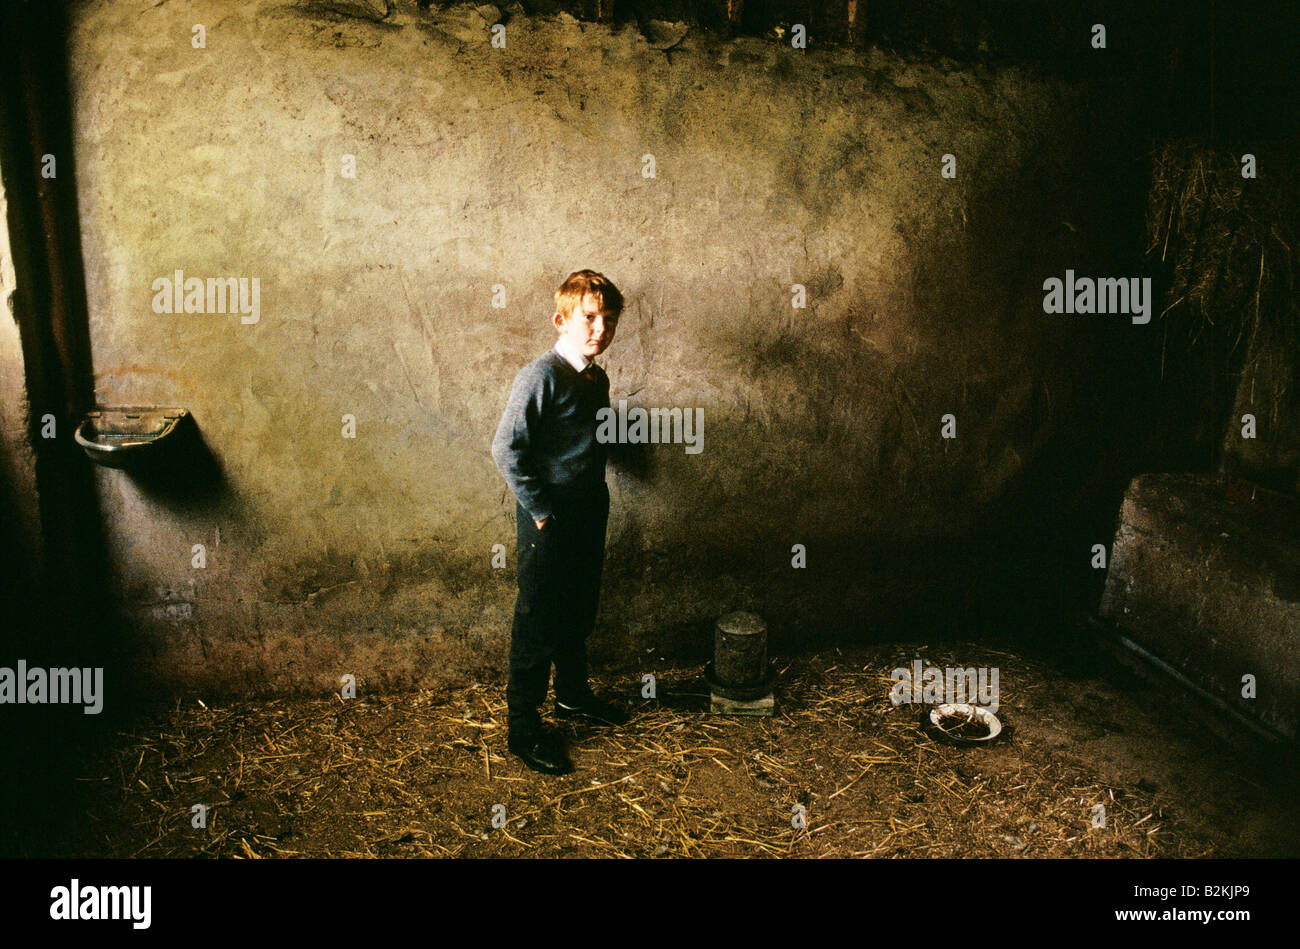 RURAL NORTHERN IRELAND GINGER HAIRED BOY WEARING HIS SCHOOL UNIFORM STANDING INSIDE BUILDING WHERE CHICKENS ARE FED KEPT AT HOME Stock Photo